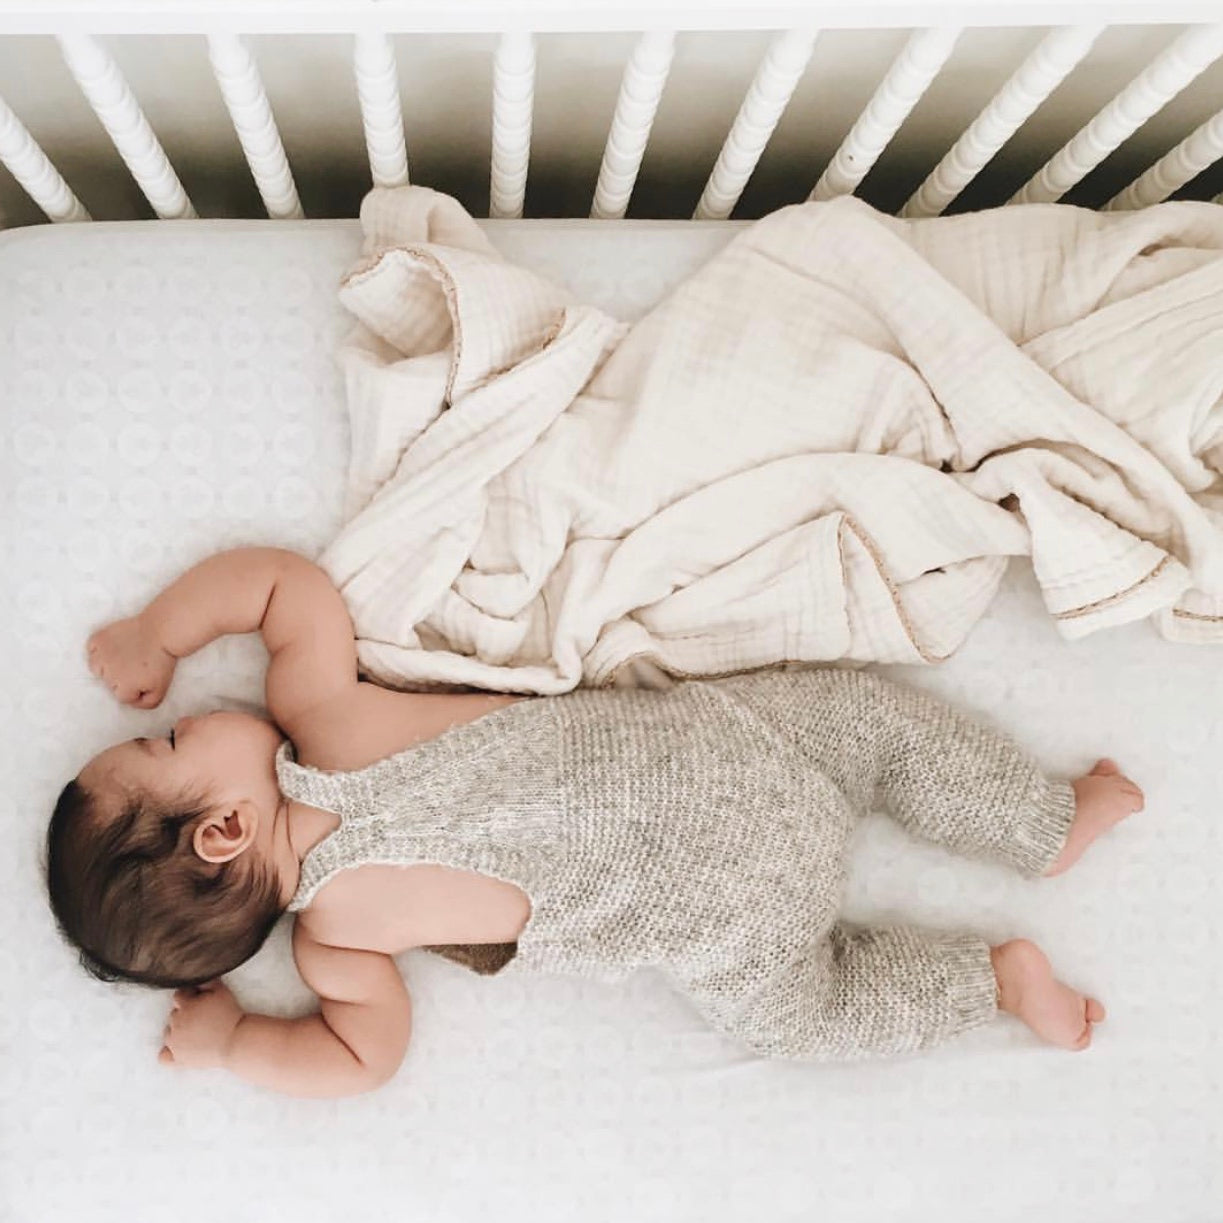 Which Positions Are Healthy For Babies To Sleep In? Why?